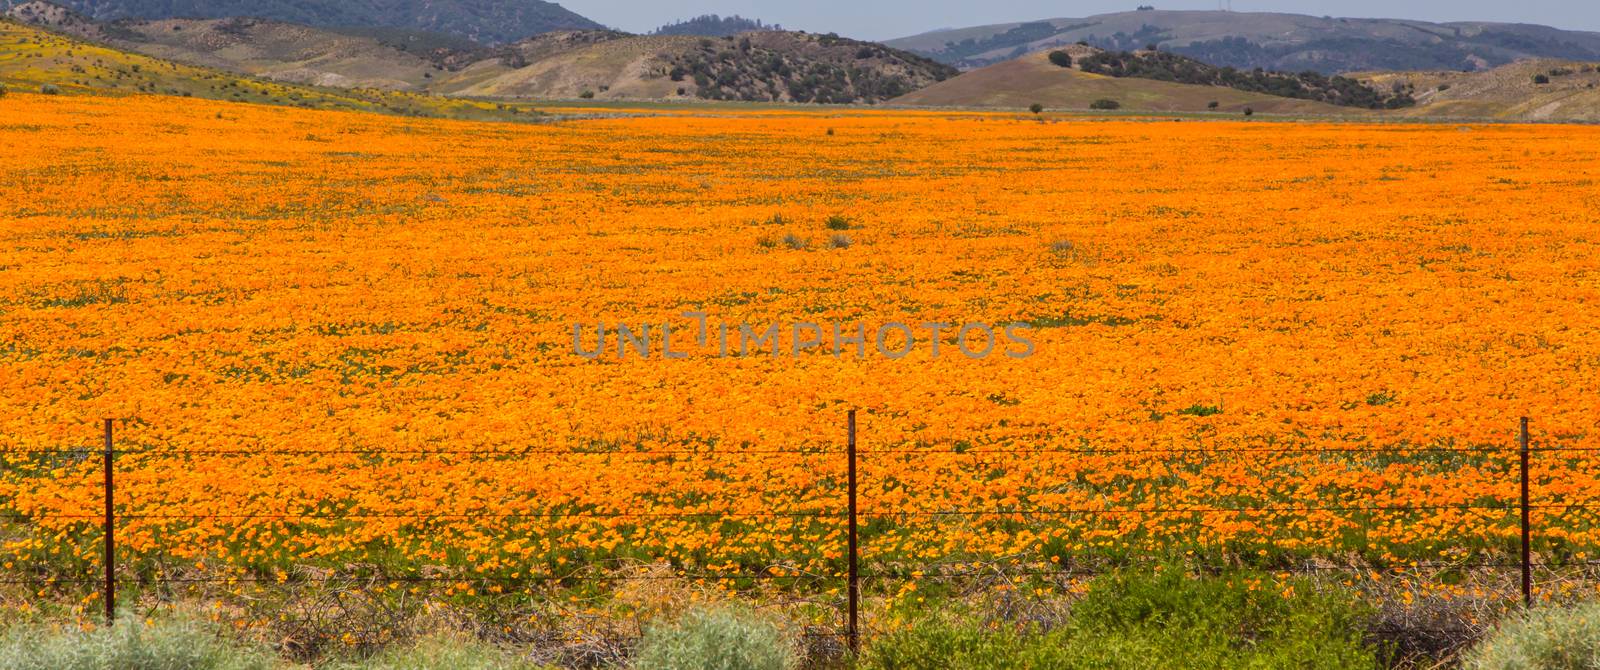 Poppies of Antelope Valley by wolterk